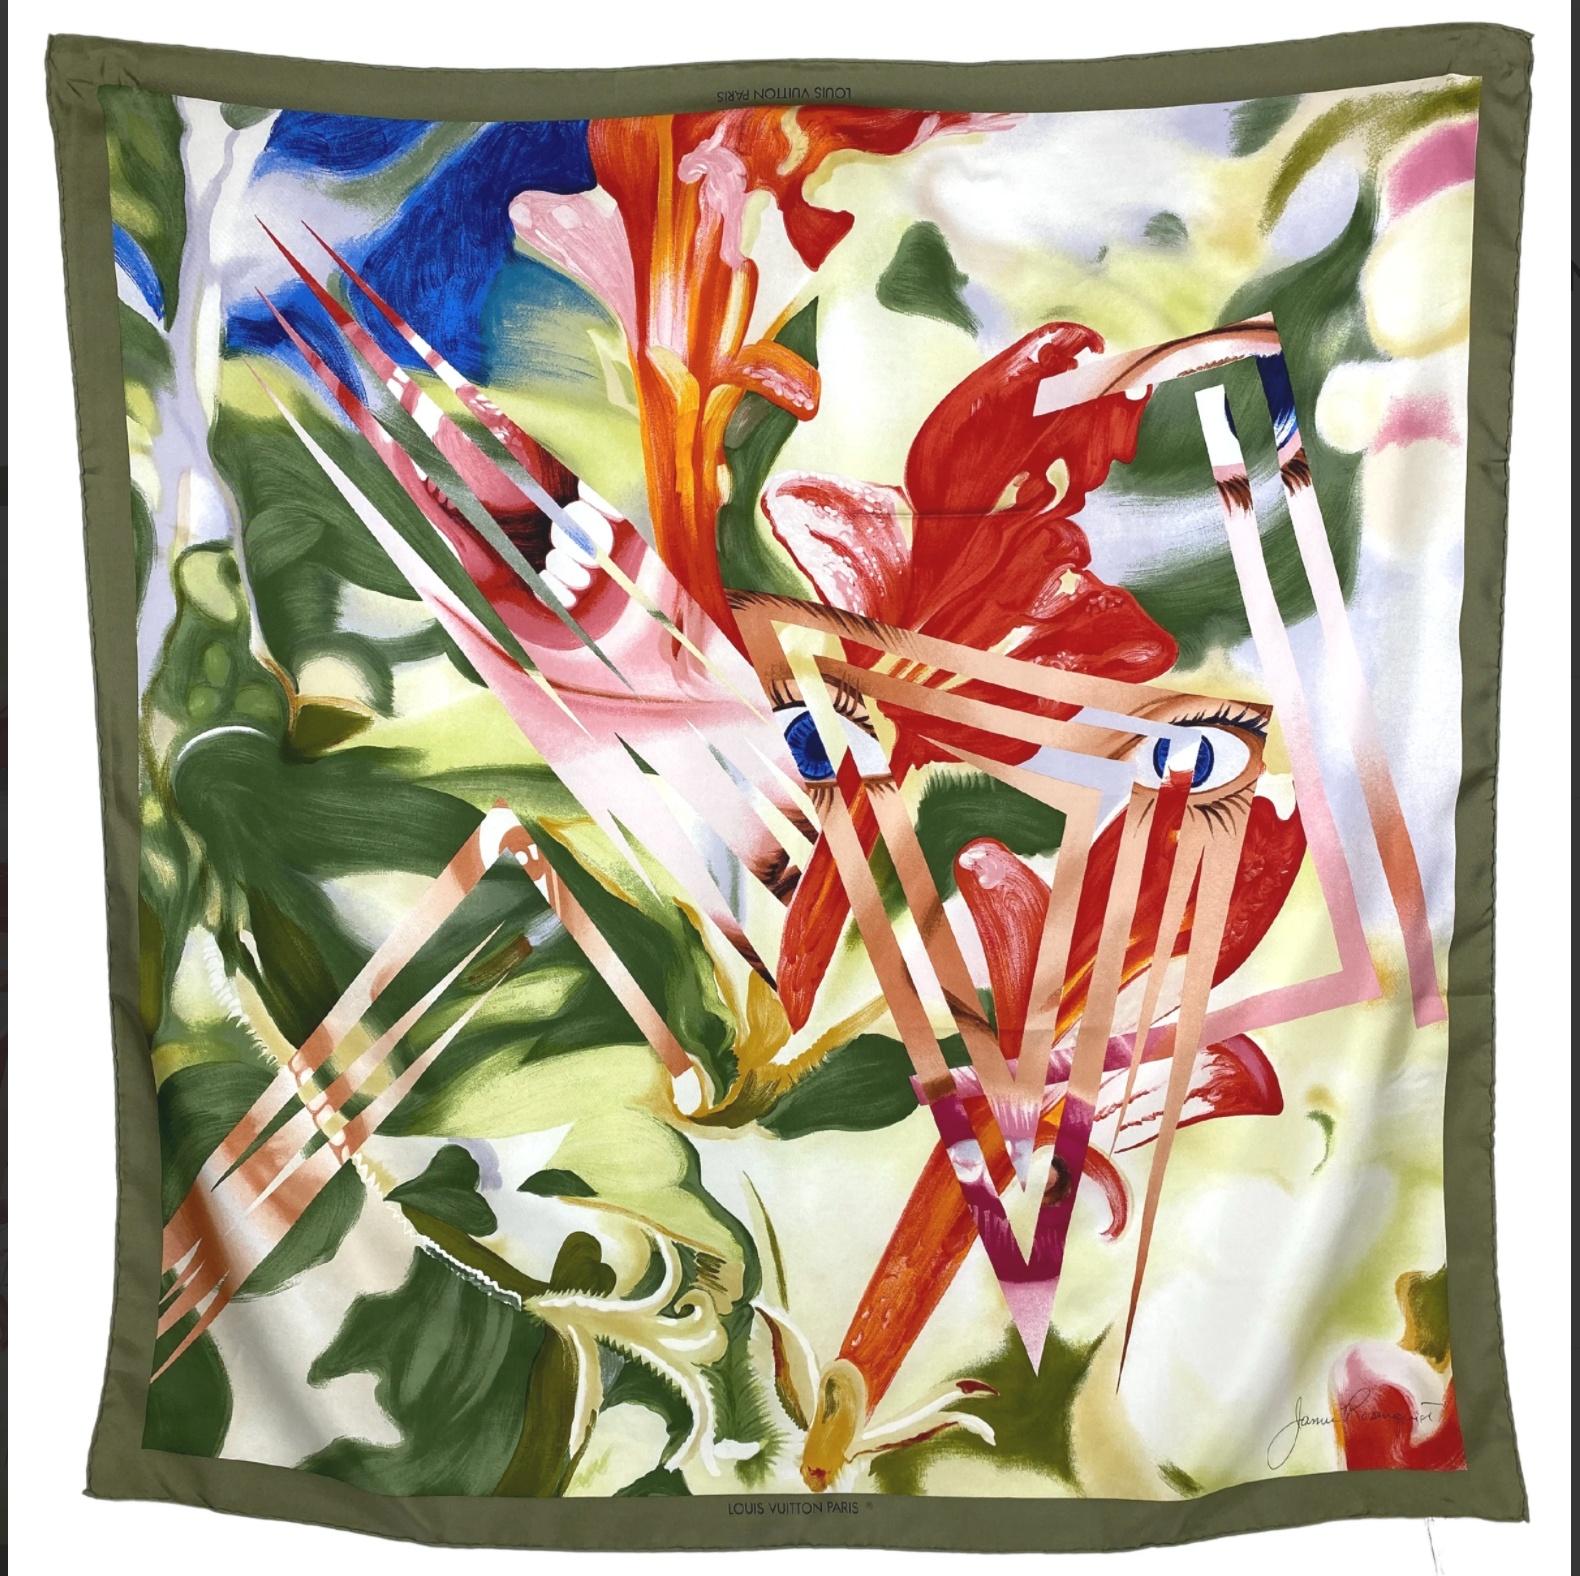 James Rosenquist
Limited Edition Vintage Louis Vuitton Silk Scarf, 1987
Screenprint on 100% Italian Silk Scarf . Signed on the plate 
34 × 34 in  86.4 × 86.4 cm
Limited Edition of 500
Unframed with original folds
Signed on the fabric with artist's